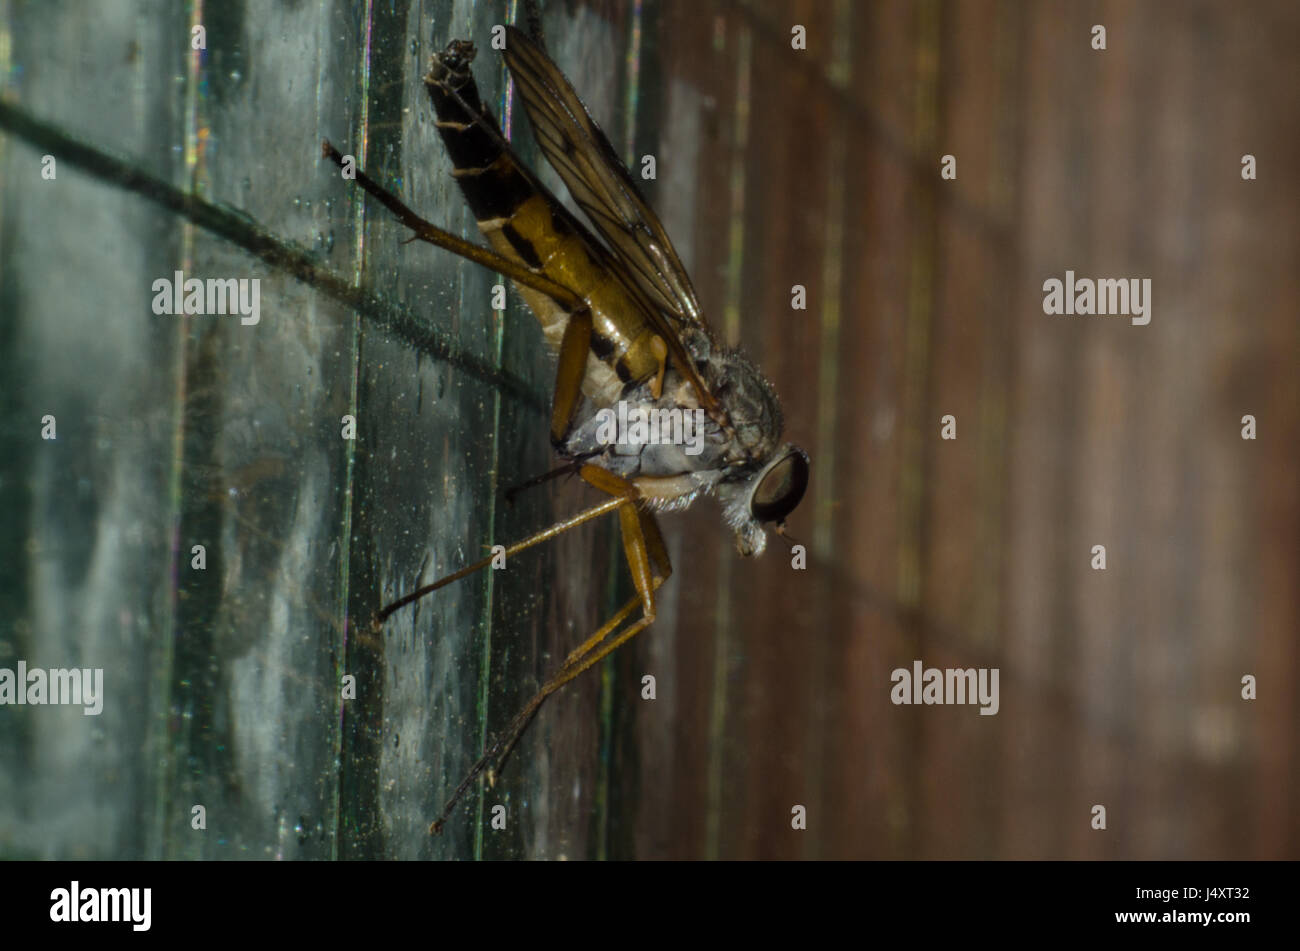 Assassin fly on a glass pane Stock Photo